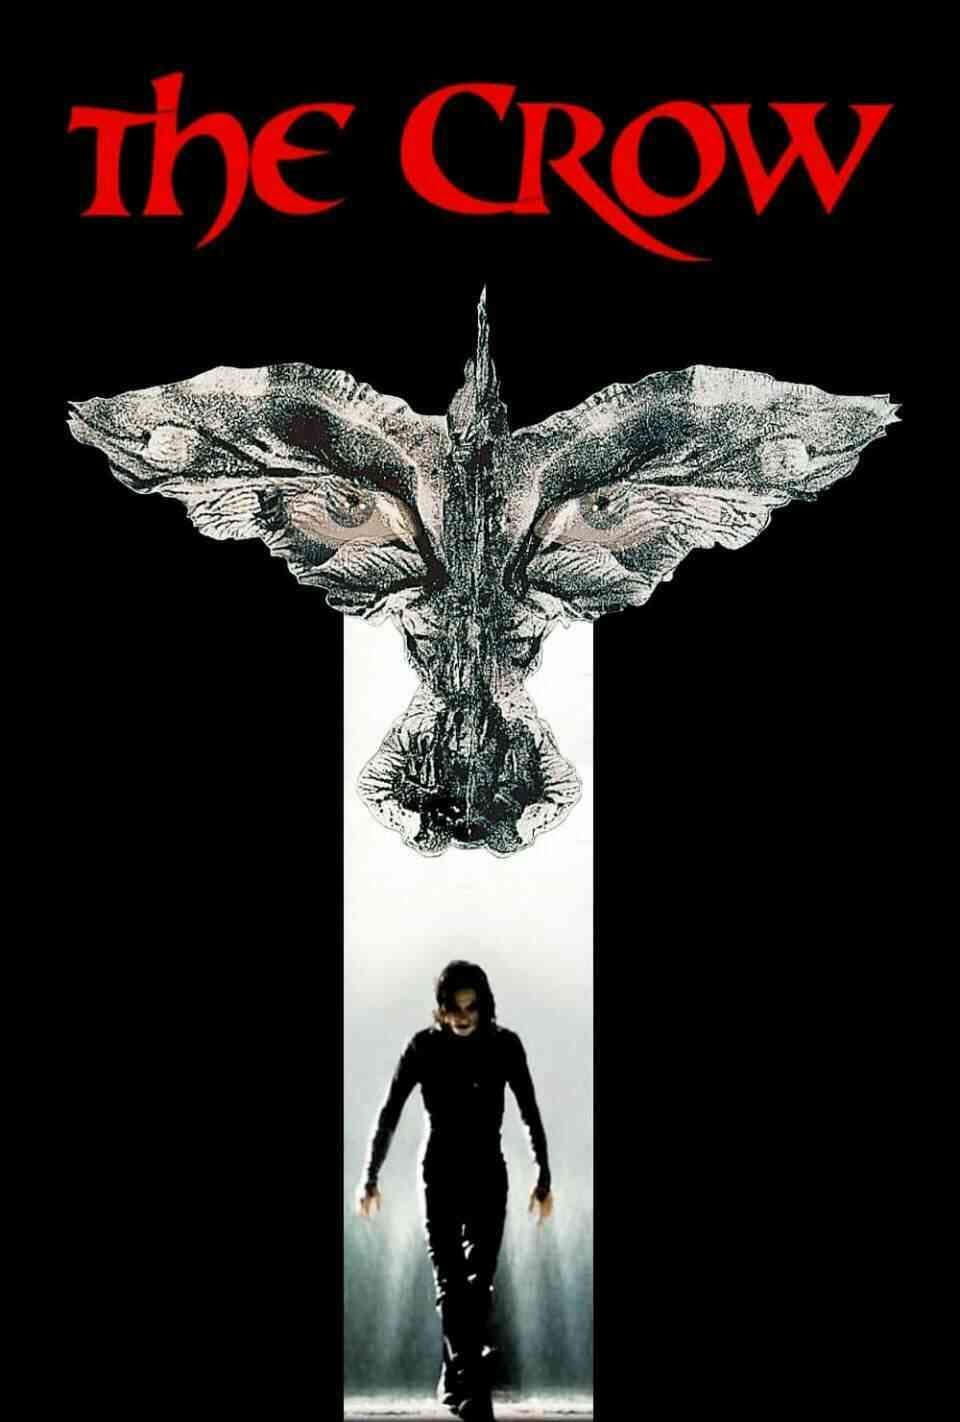 Read The Crow screenplay (poster)